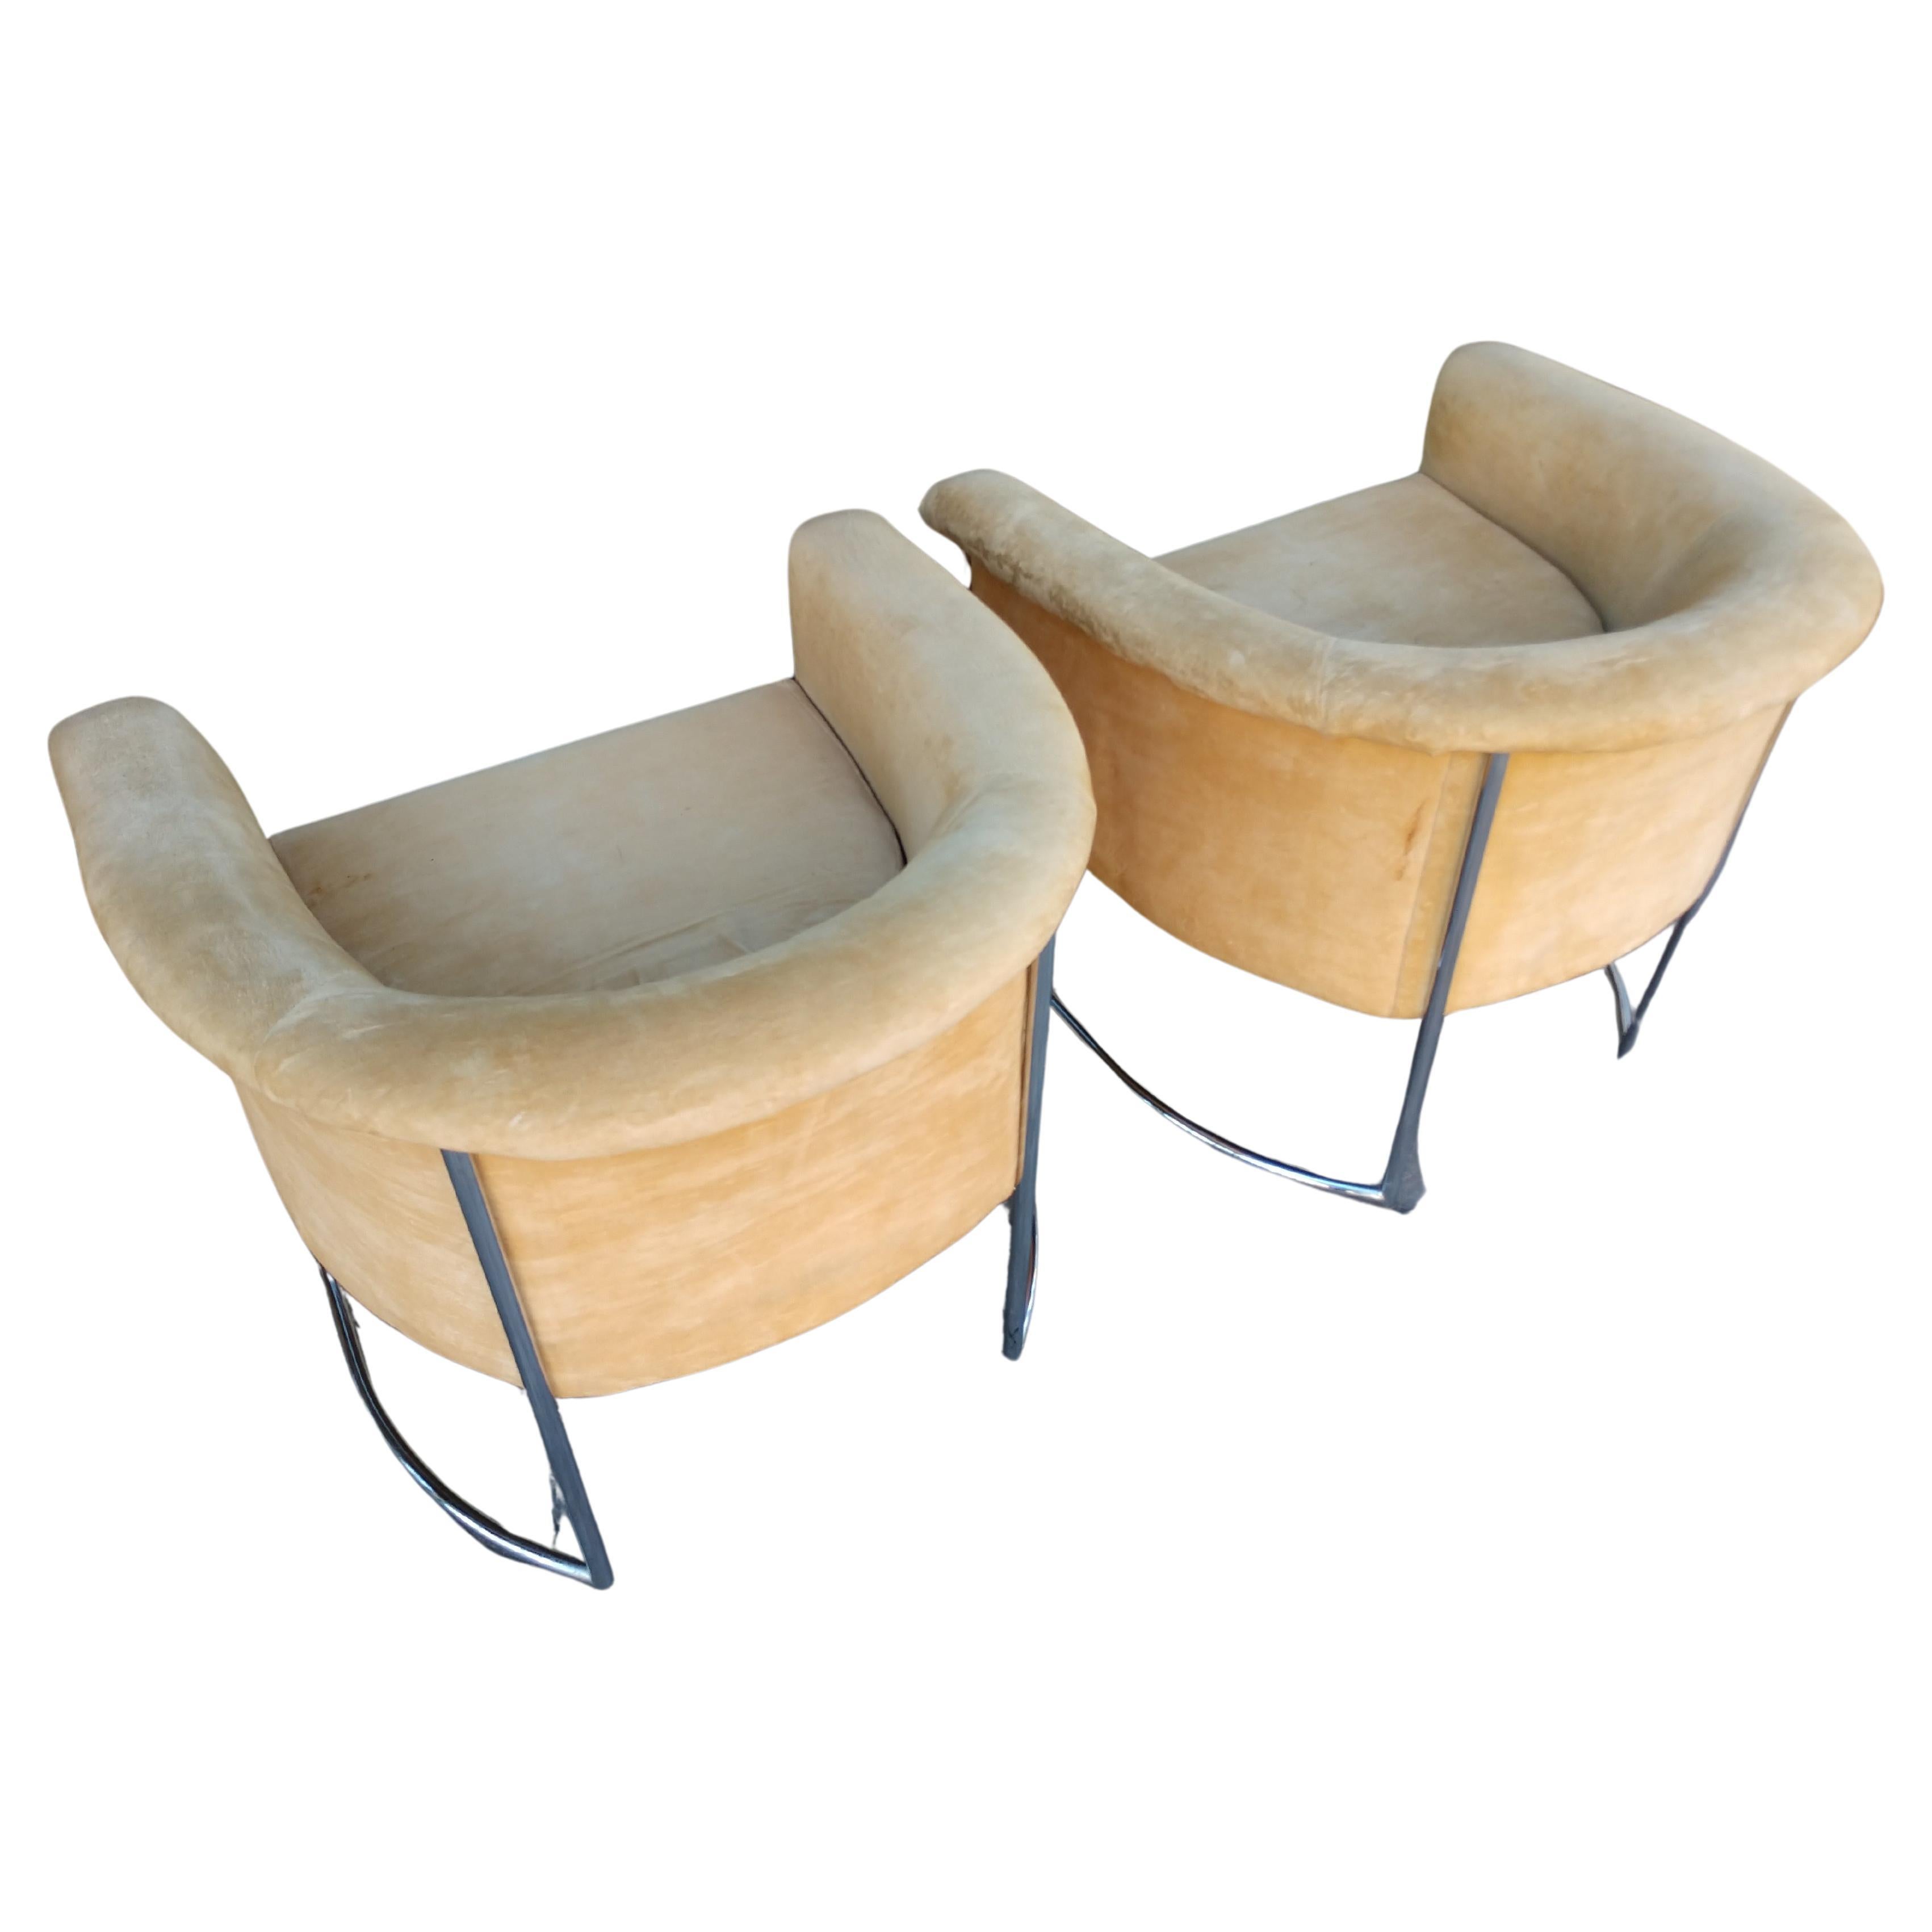 Pair of Mid-Century Modern Barrel Back Lounge Chairs In Good Condition For Sale In Port Jervis, NY